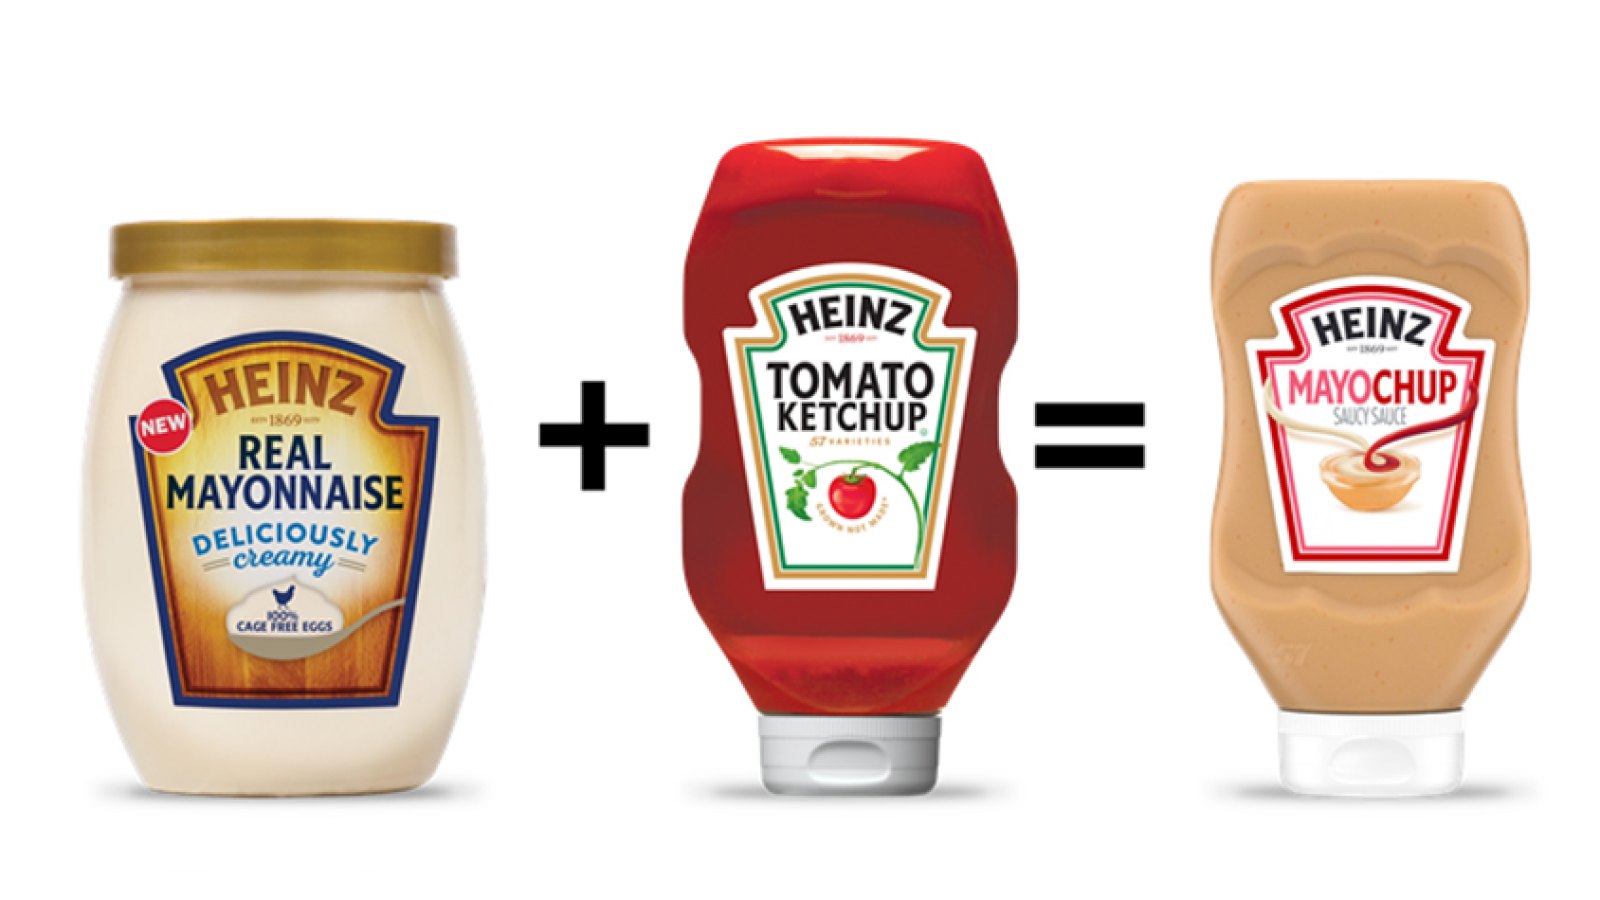 Heinz’s New Mayochup Condiment Combines Two Staples, But Not Everyone Is a Fan